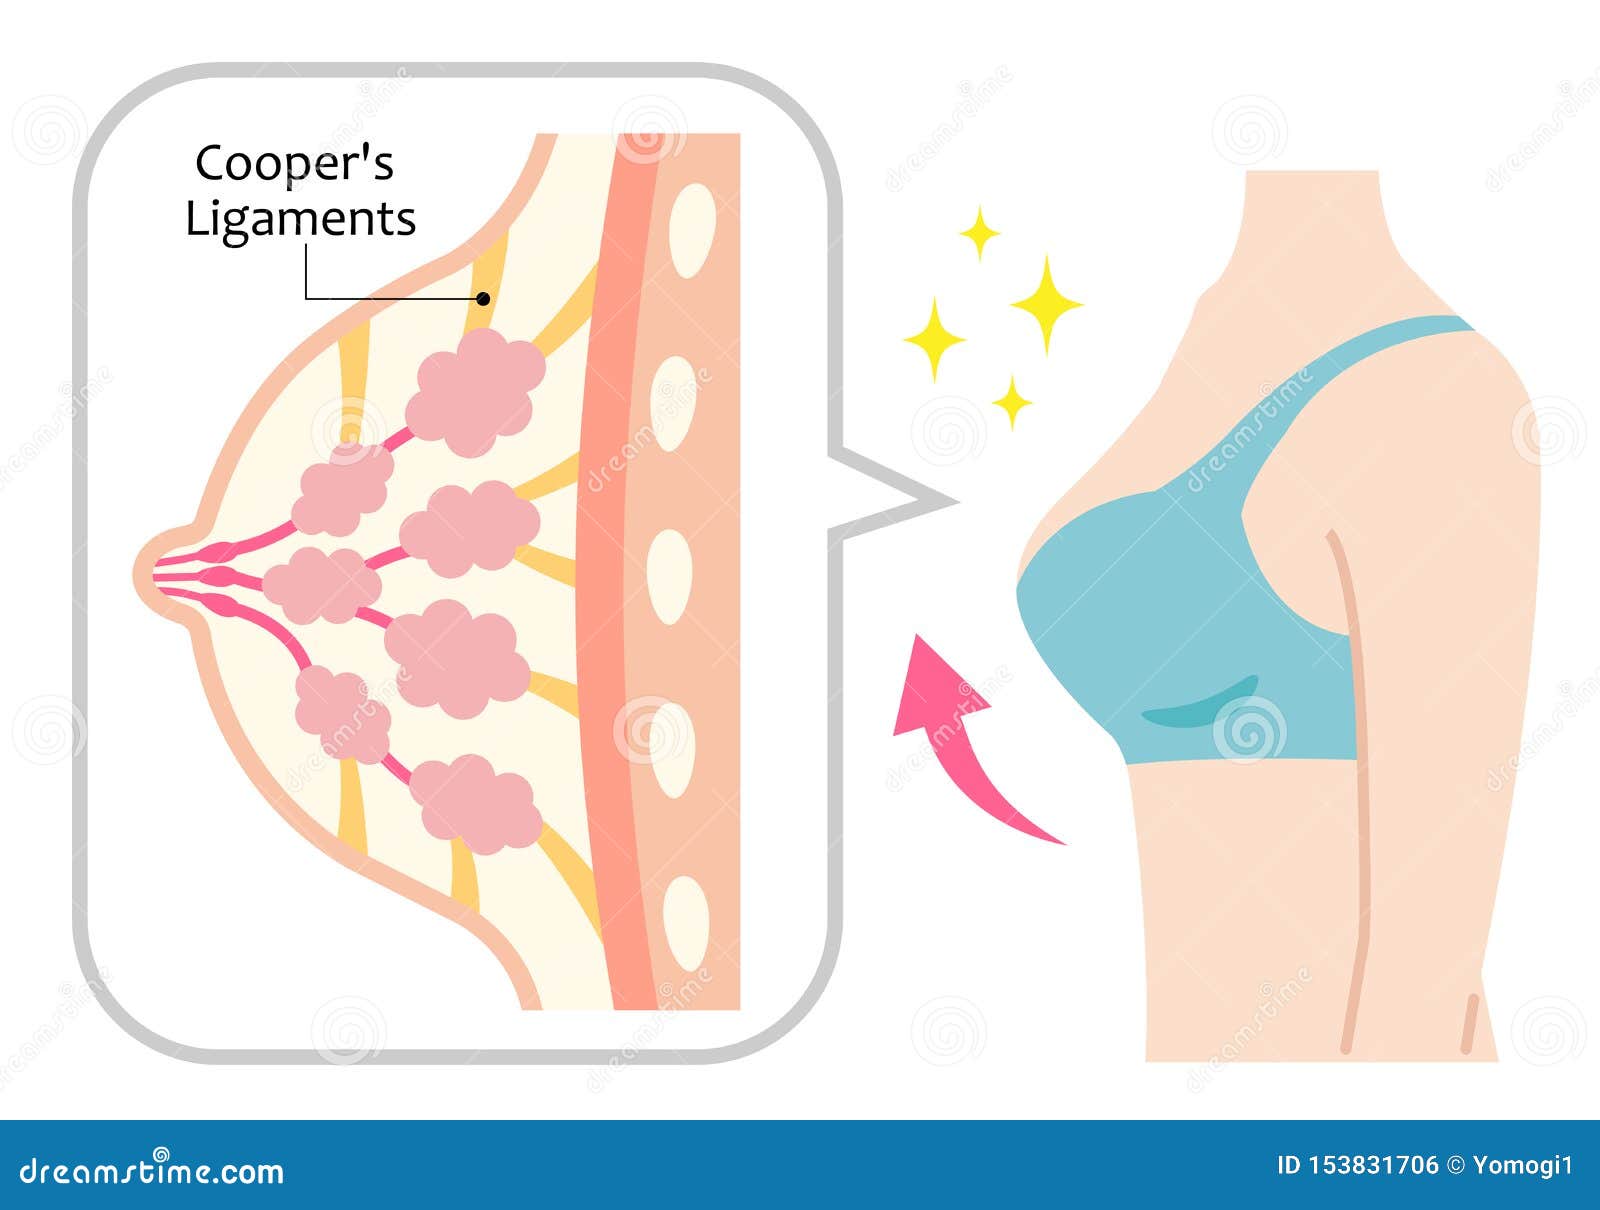 https://thumbs.dreamstime.com/z/diagram-perky-female-boobs-illustration-ligaments-cooper-hold-them-maintain-structure-isolated-white-background-firm-153831706.jpg